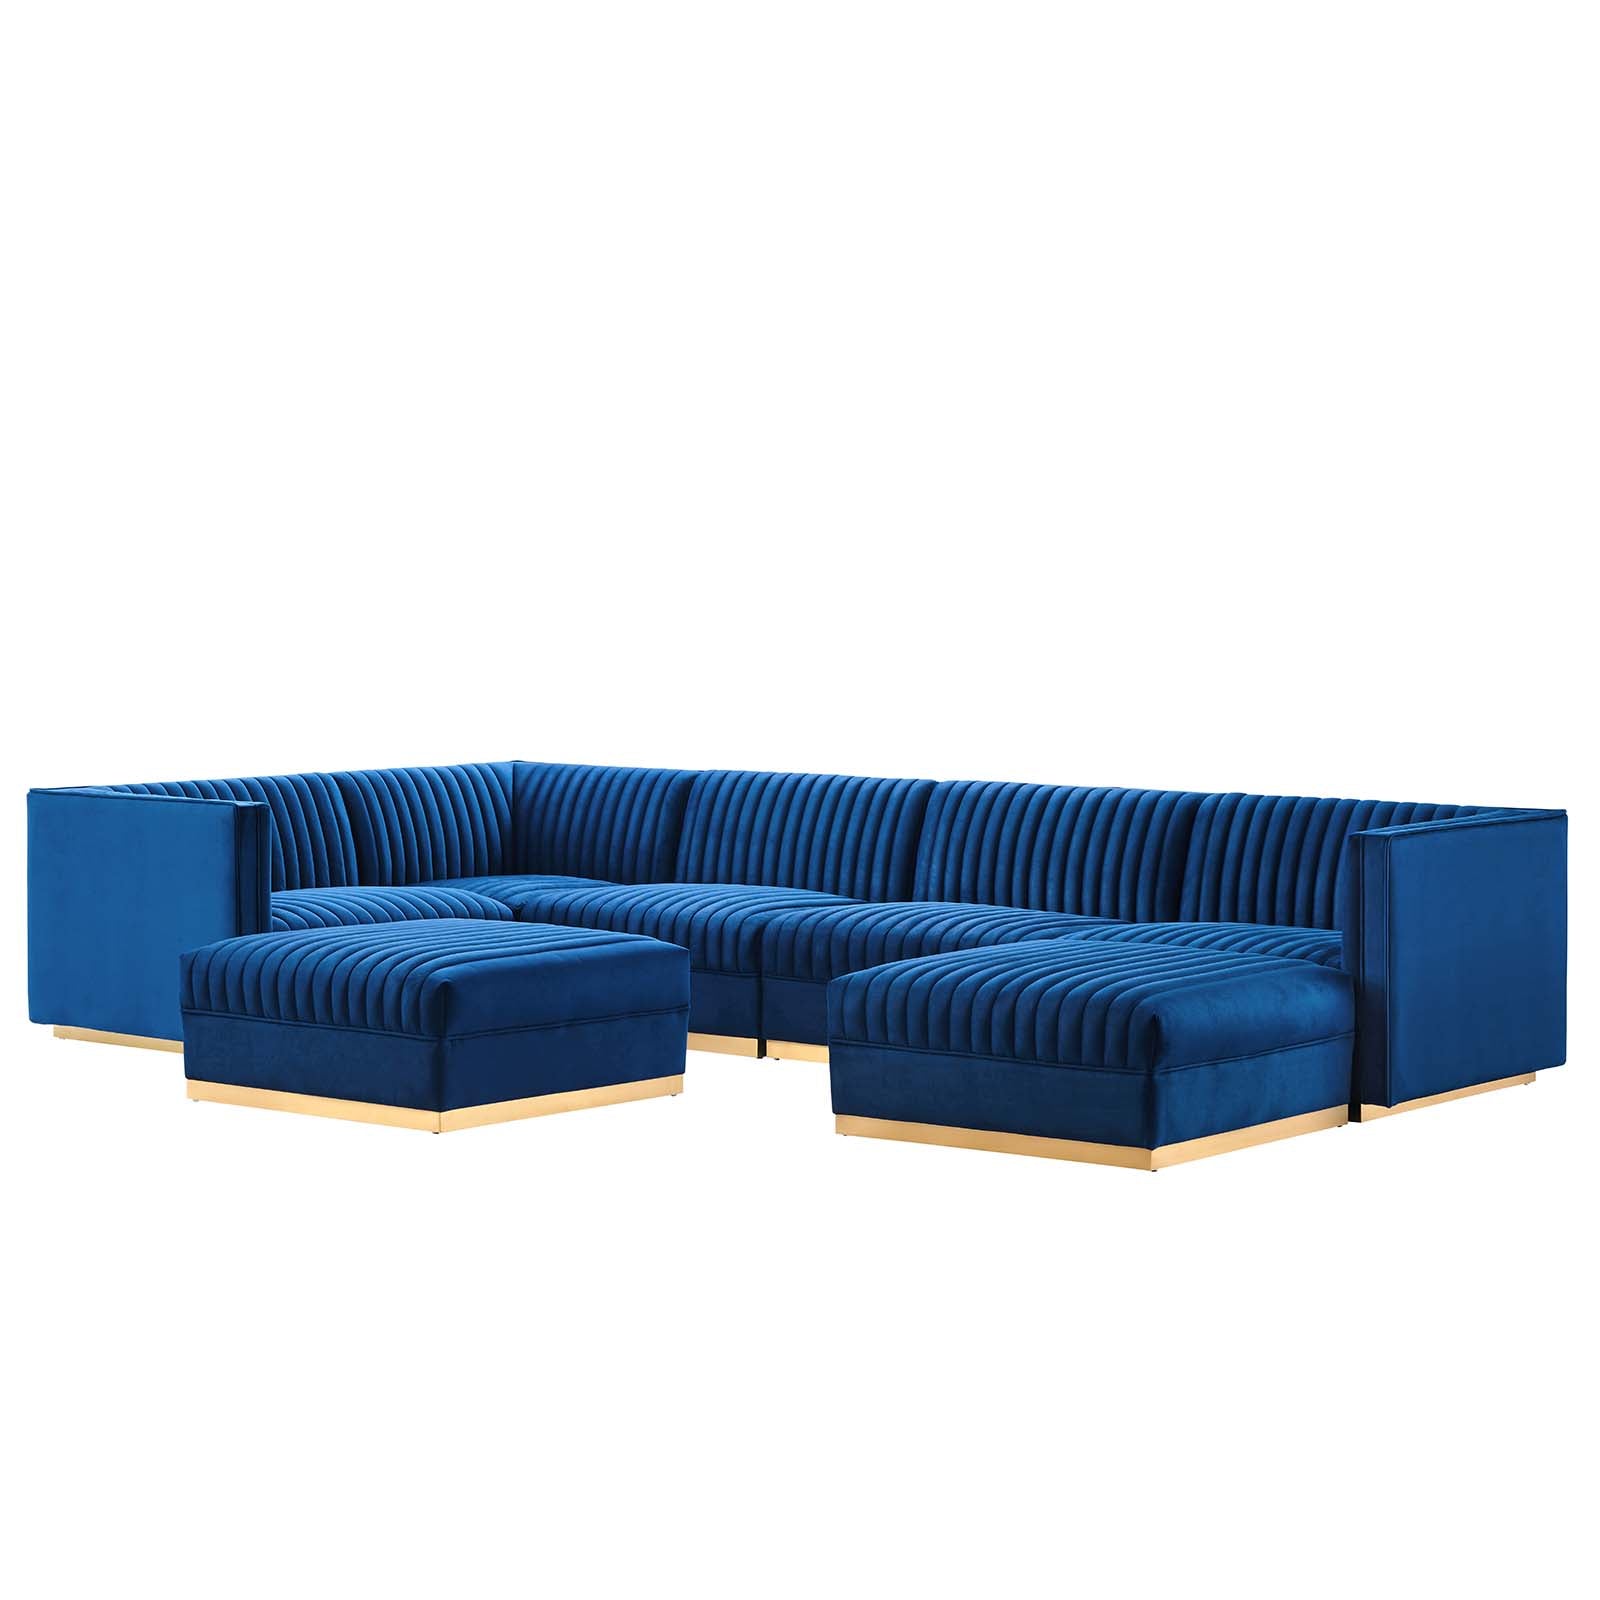 Modway Sectional Sofas - Sanguine Channel Tufted Performance Velvet 7-Piece Left-Facing Modular Sectional Sofa Navy